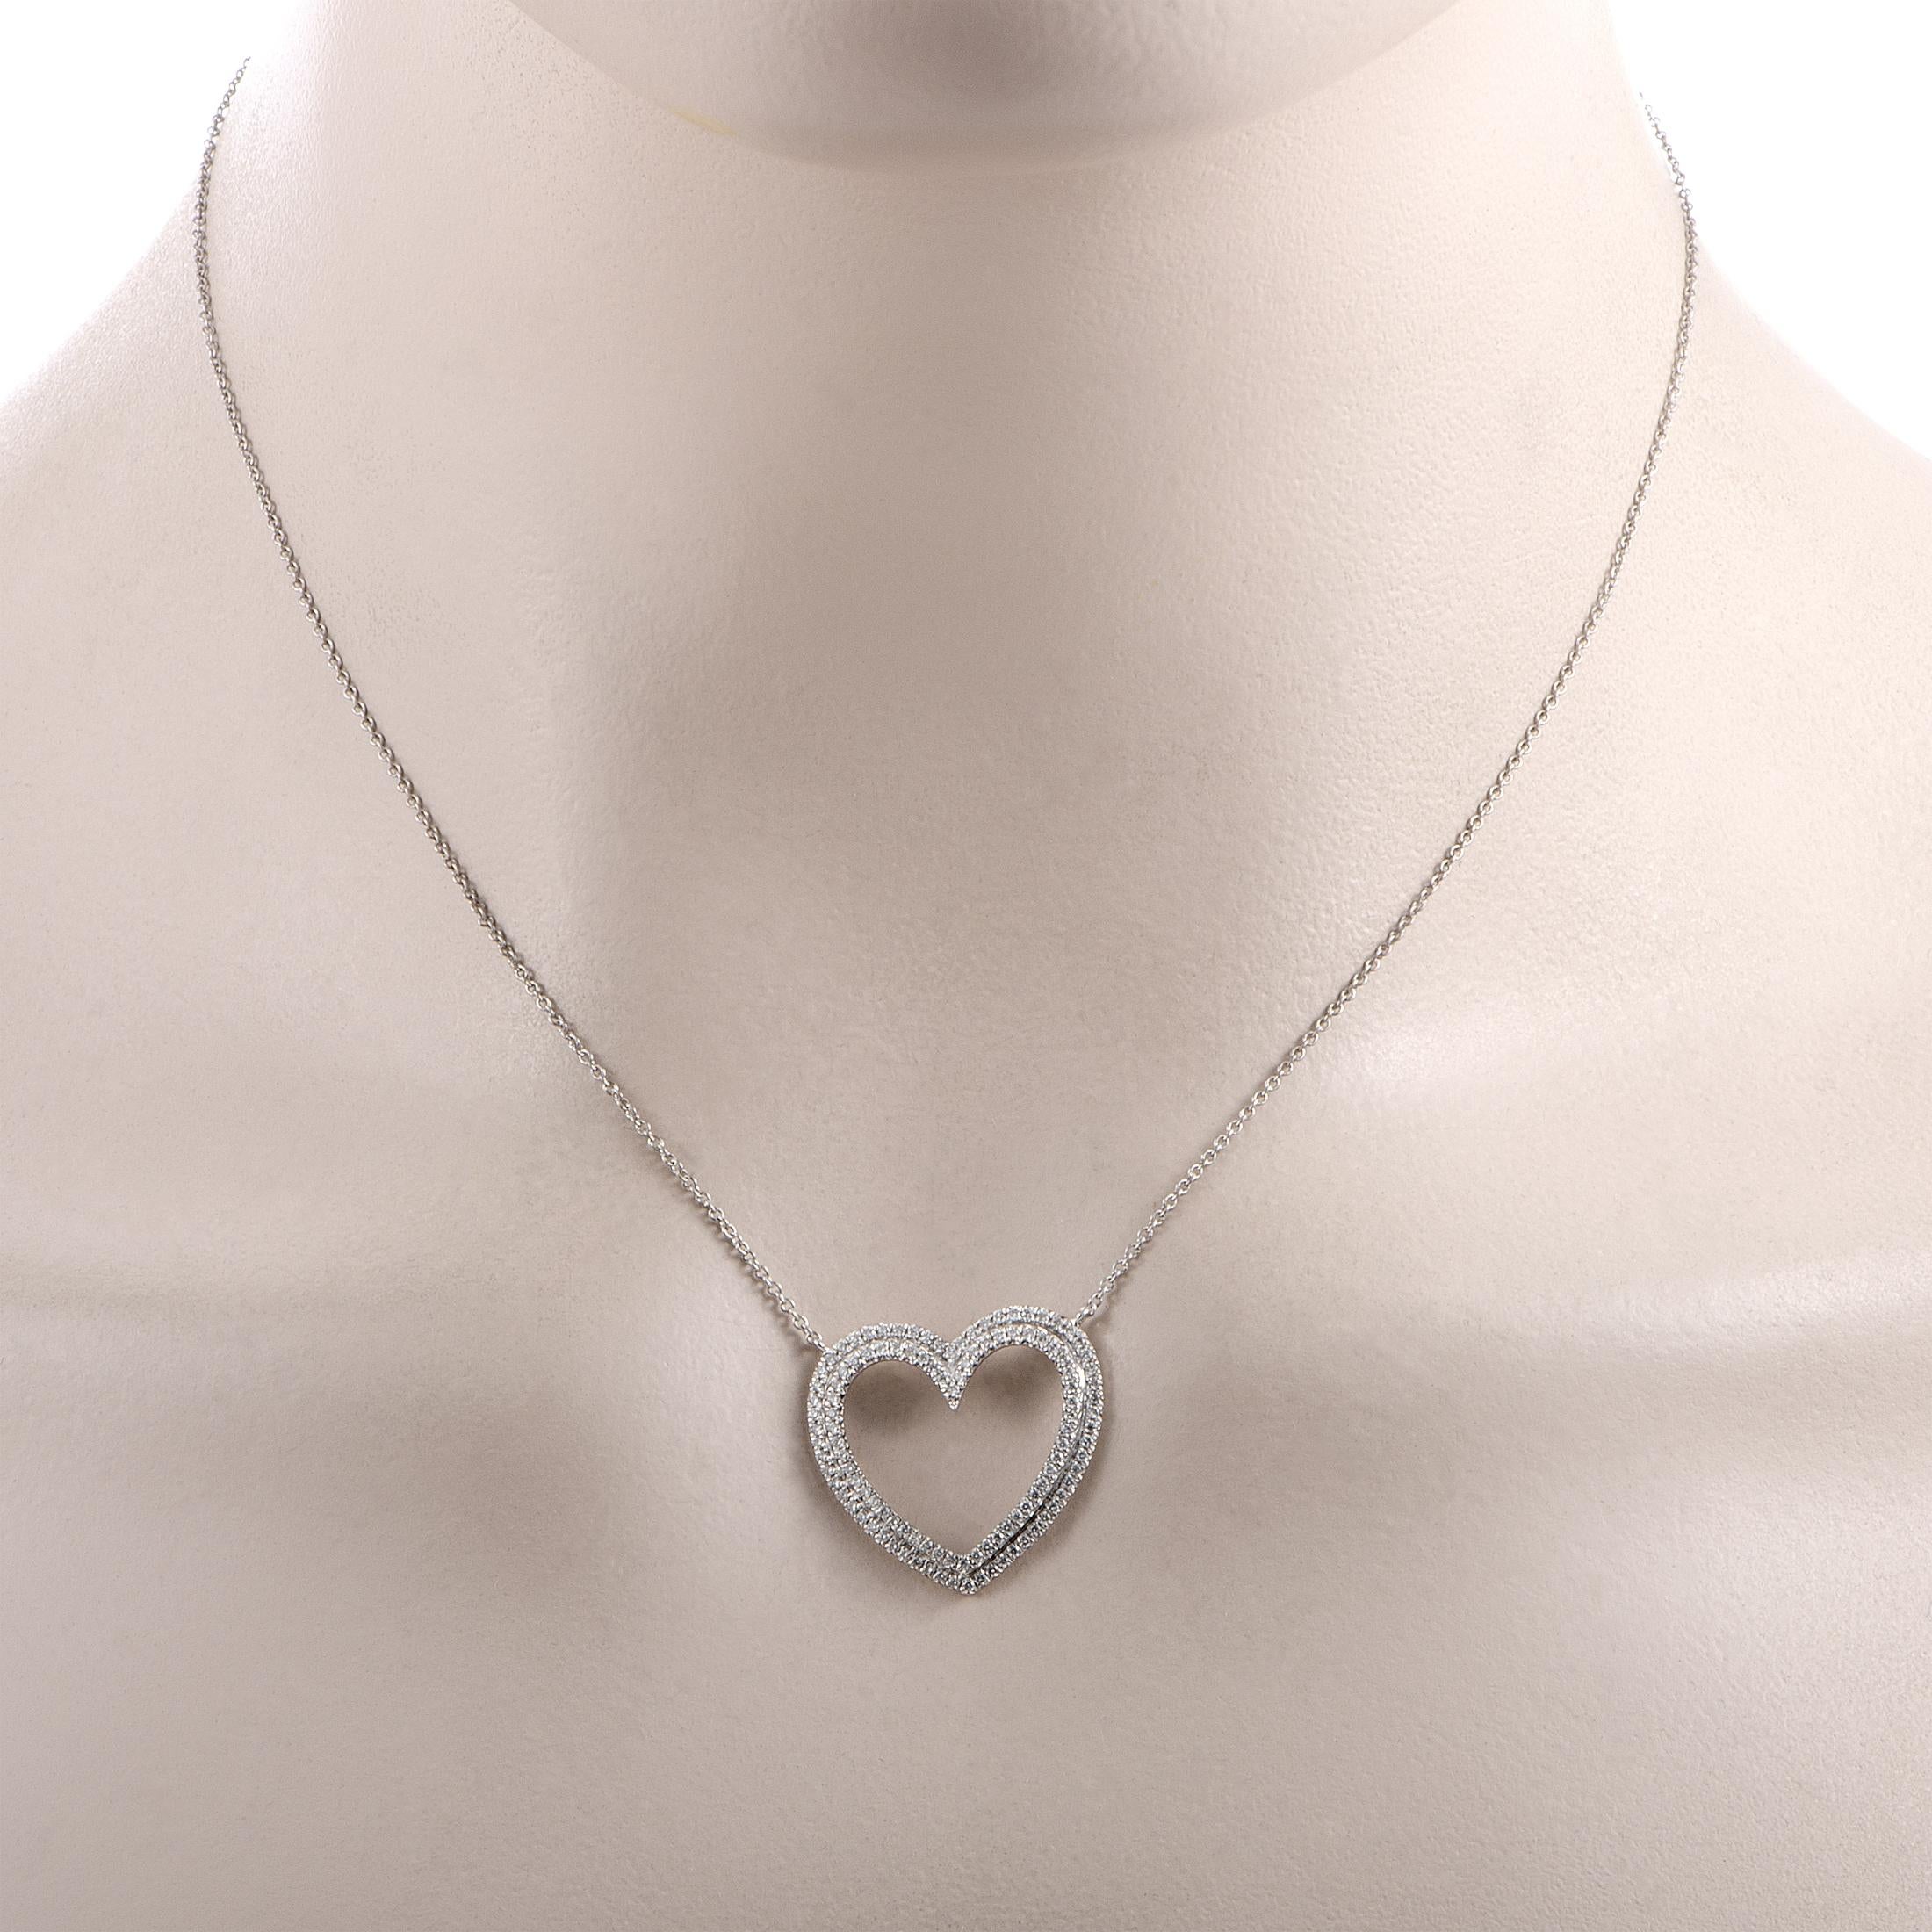 The Tiffany & Co. “Metro” necklace is crafted from platinum, boasting a 15.00” chain with spring ring closure and a heart pendant that measures 0.88” by 0.88”. The necklace weighs 5.1 grams and is set with a total of 0.57 carats of diamonds.
 
